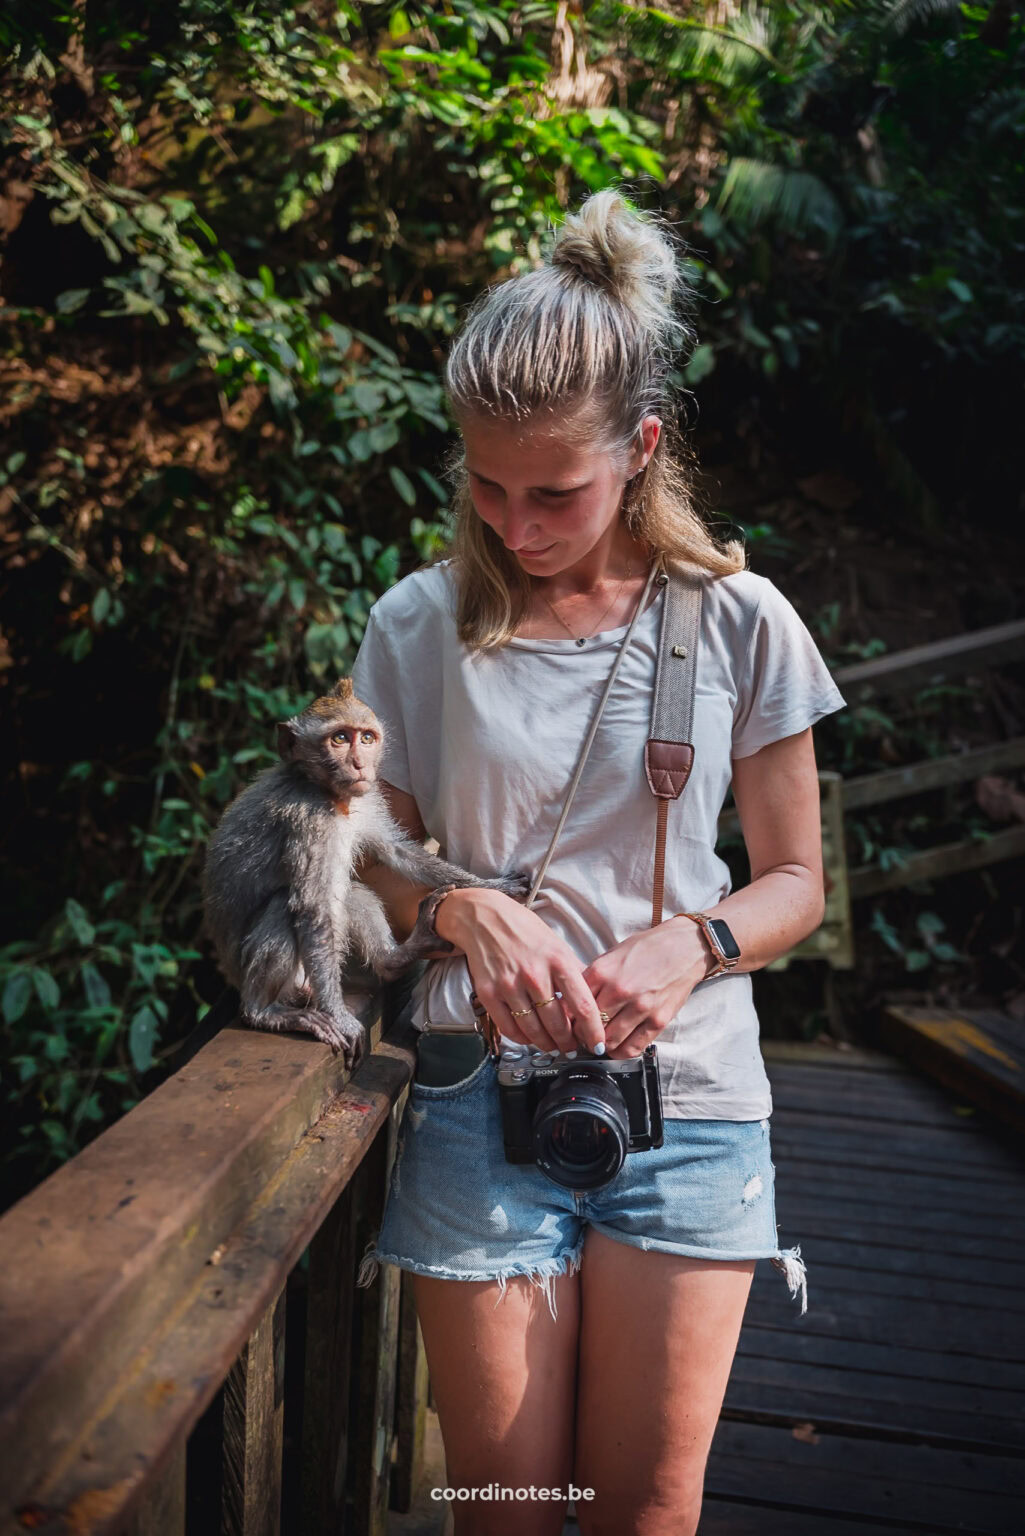 Visiting Monkey Forest is one of the best things to do in Ubud